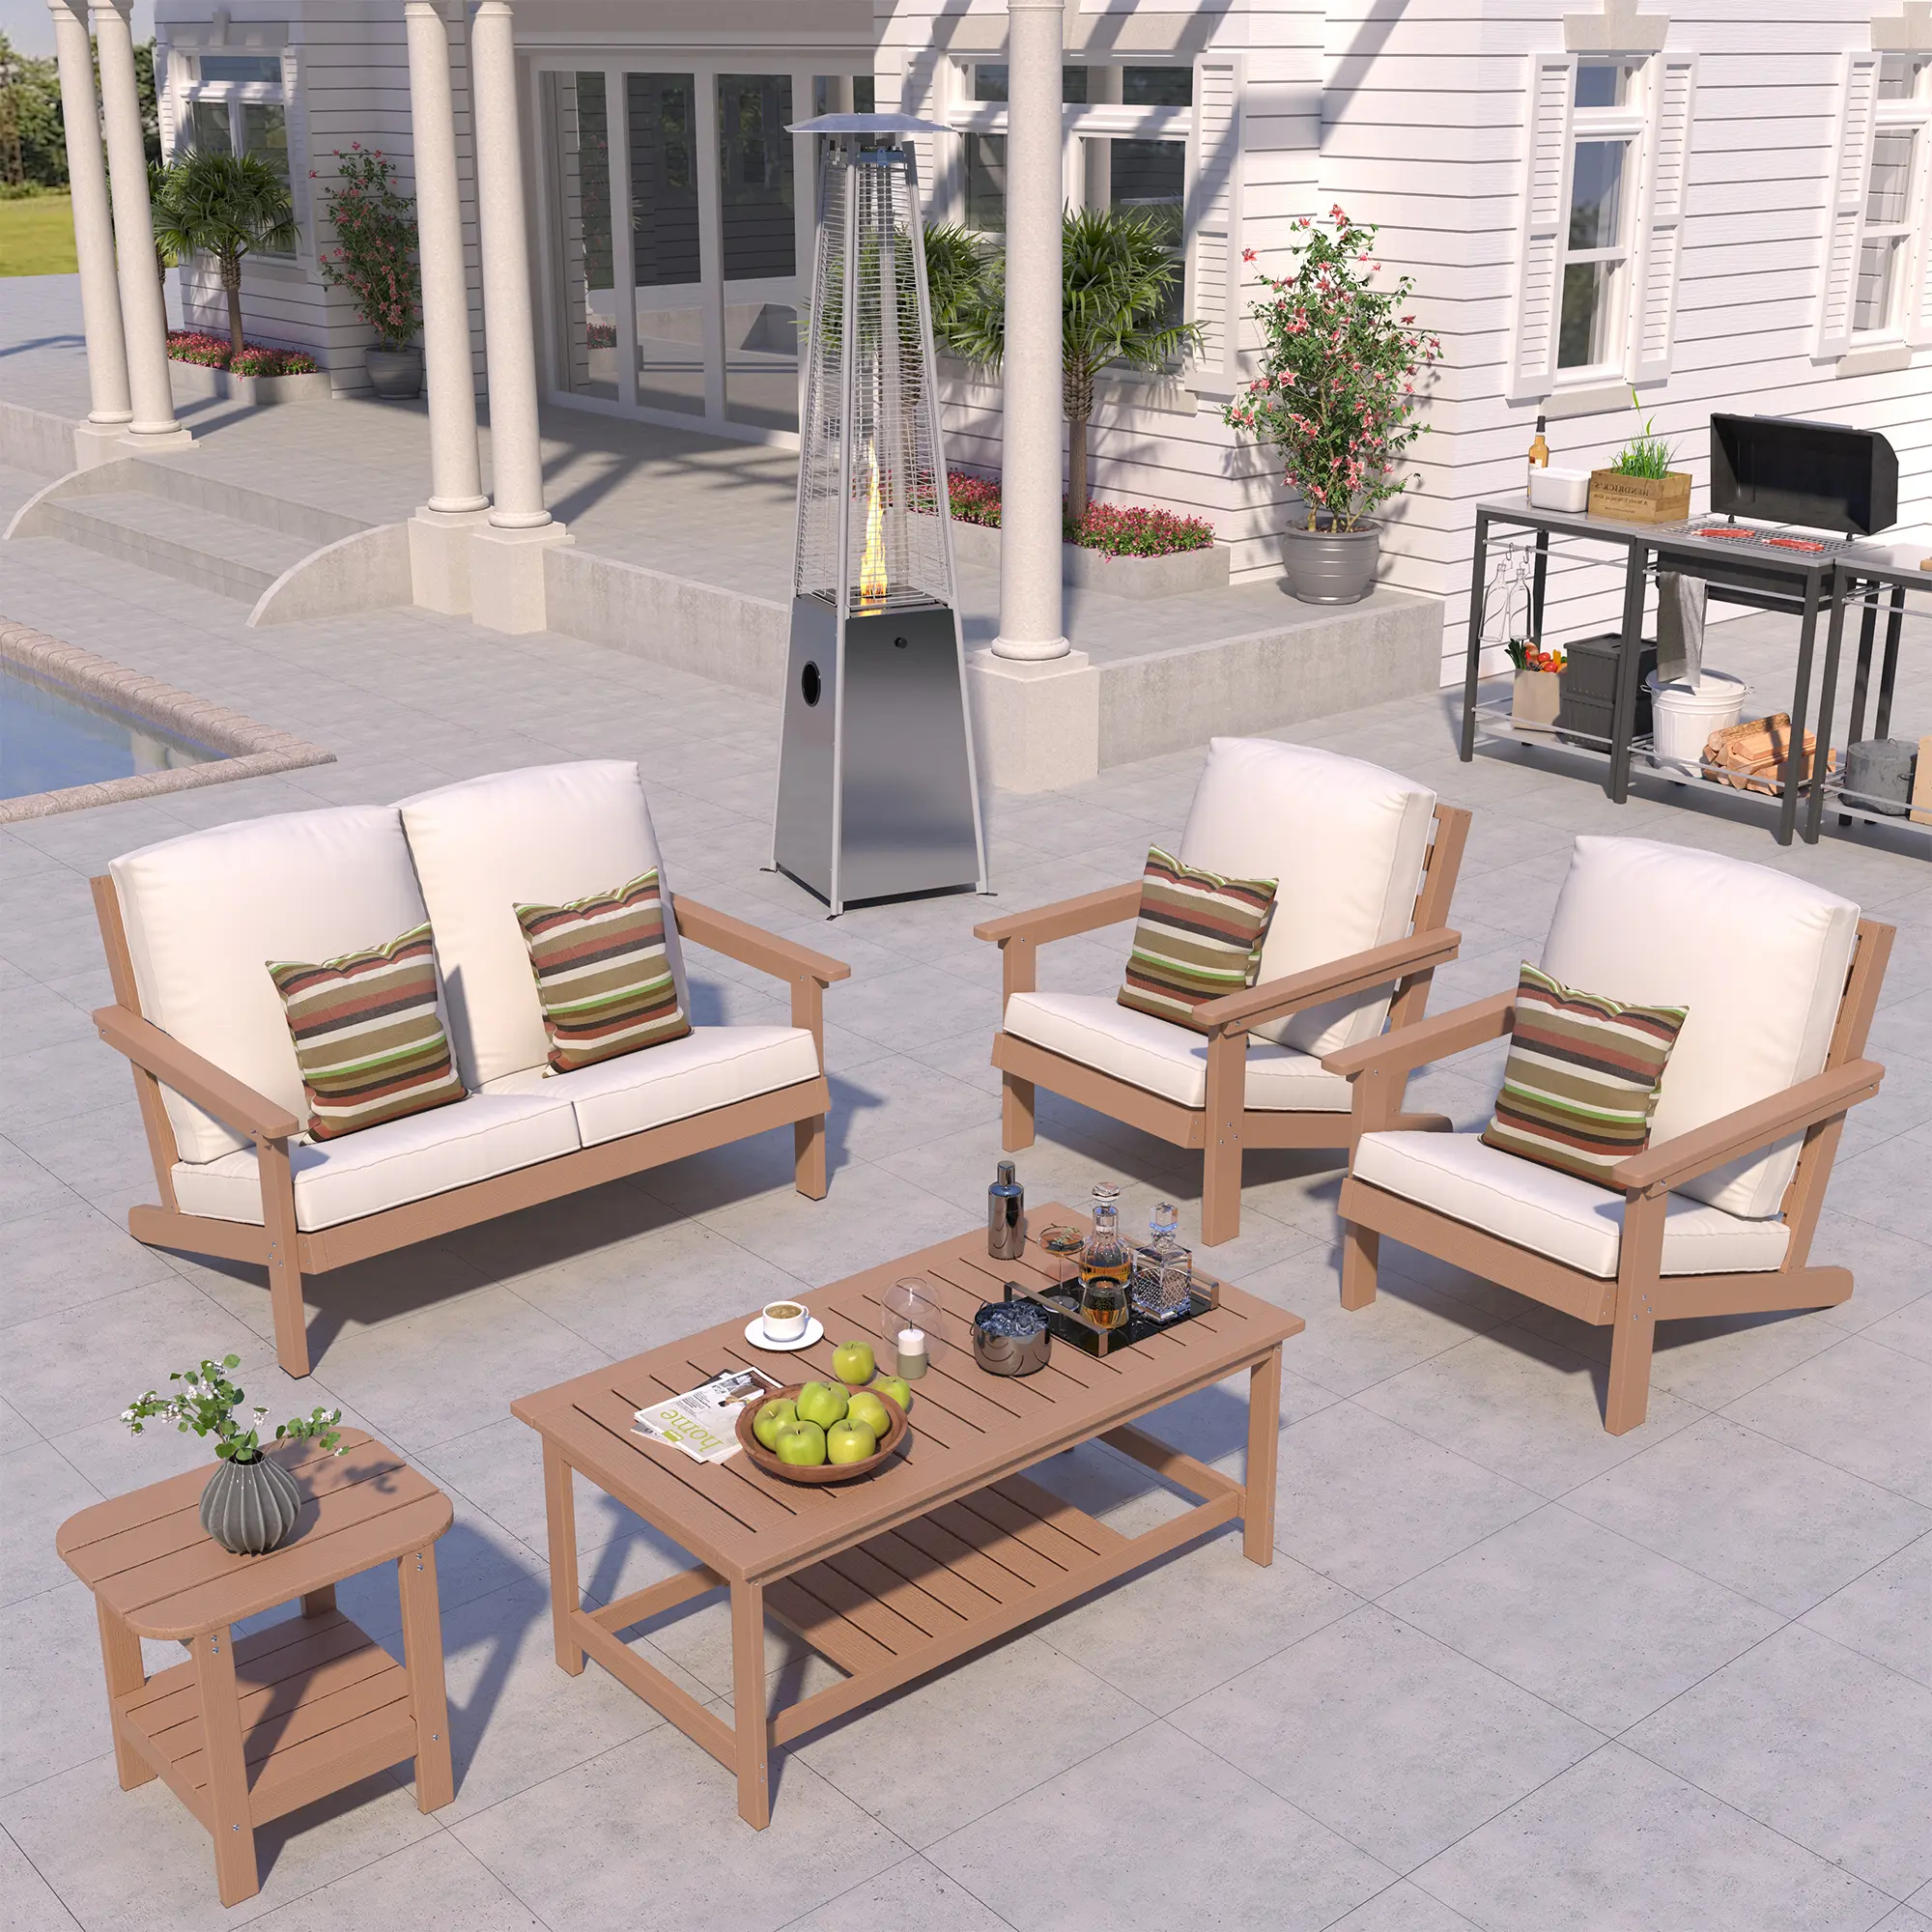 6-Piece Patio Furniture Set with Patio Lounge Chairs and Gas Propane Heater